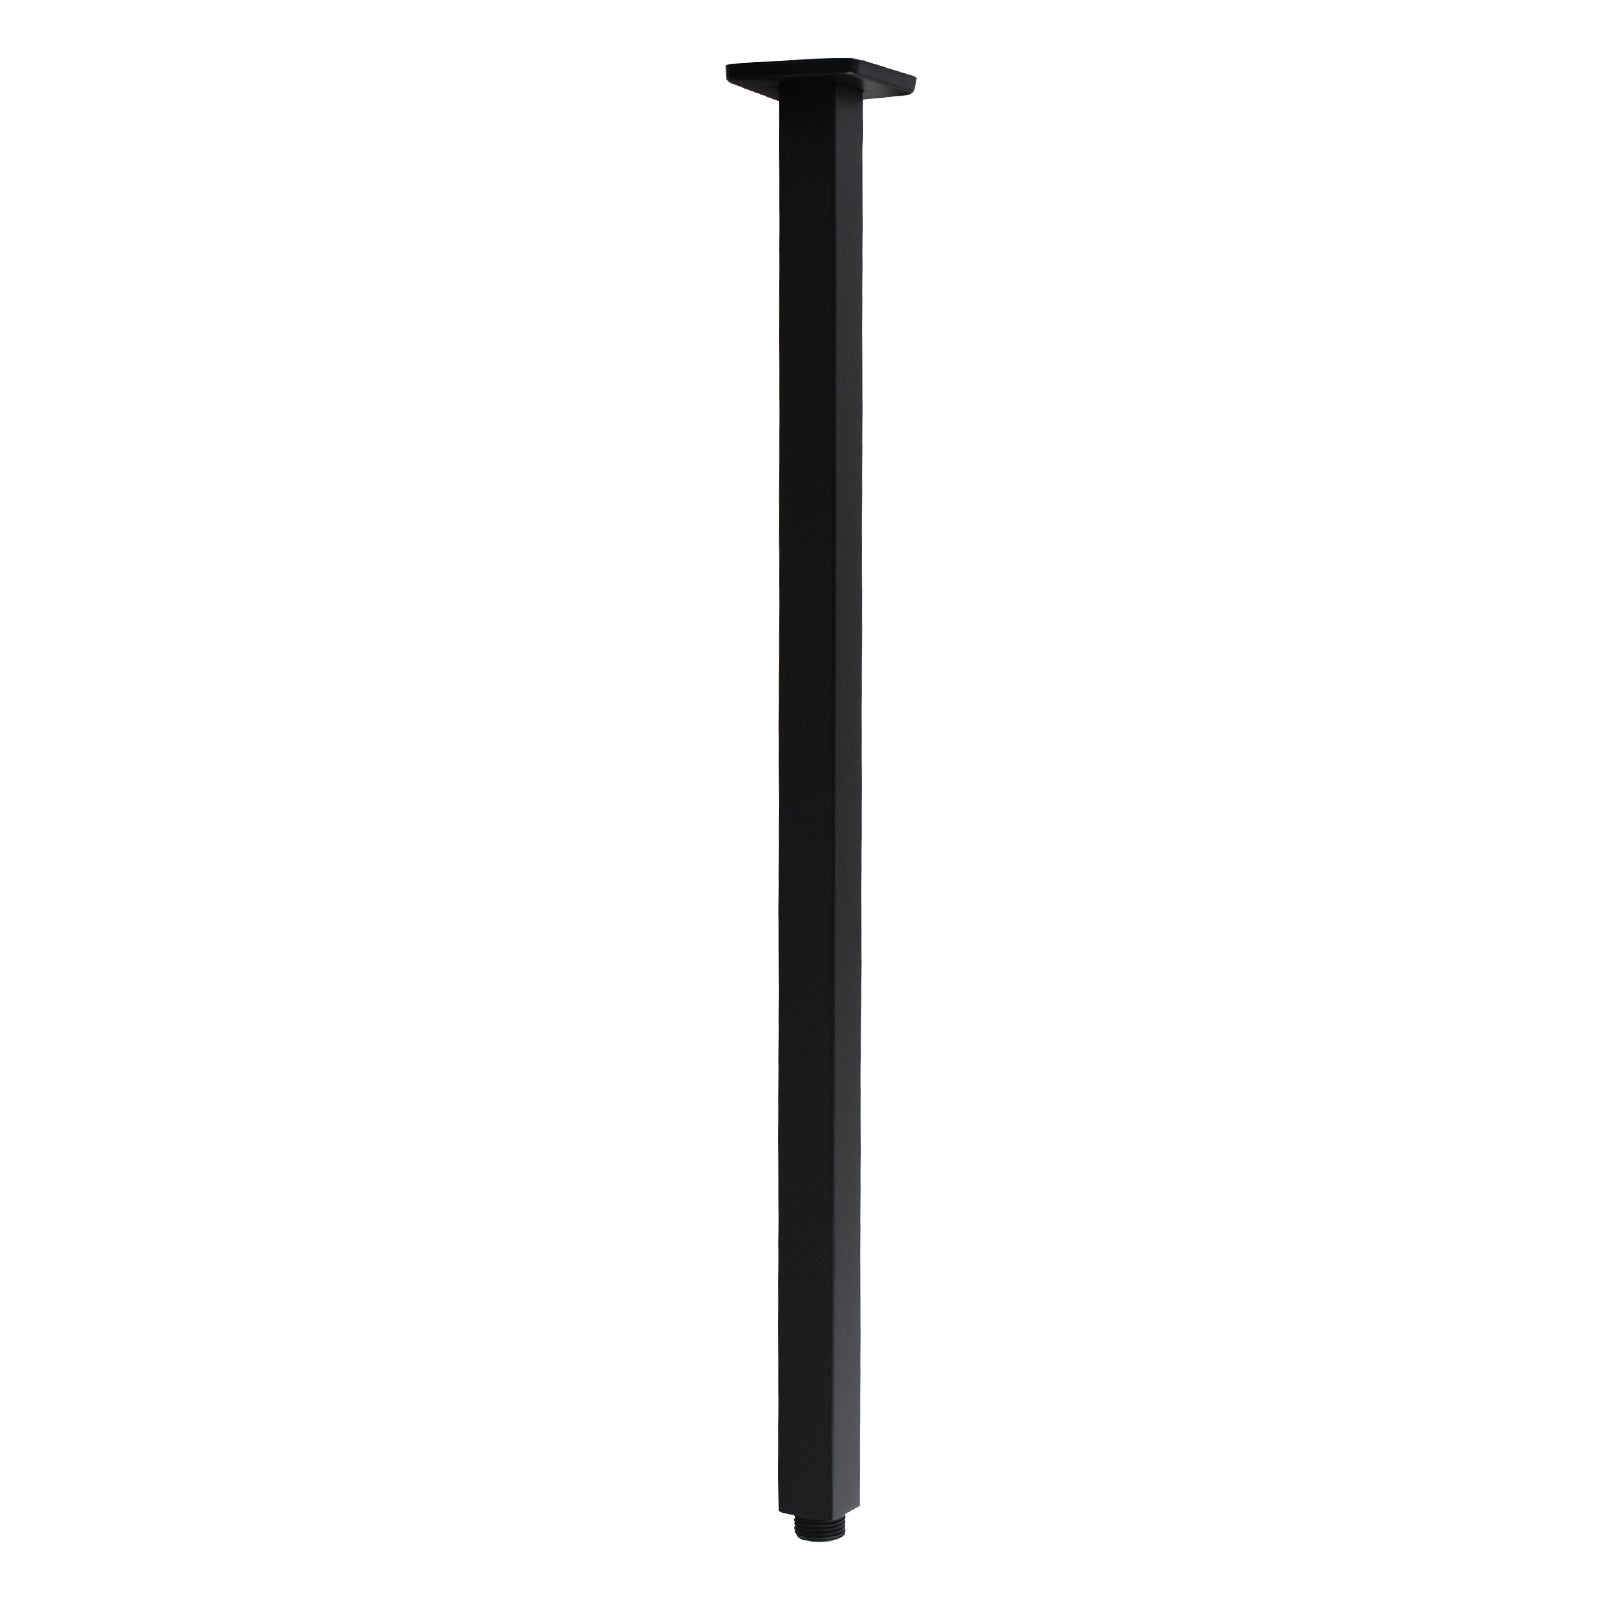 ACA Solid Brass Square Ceiling Shower Arm - Black 600mm